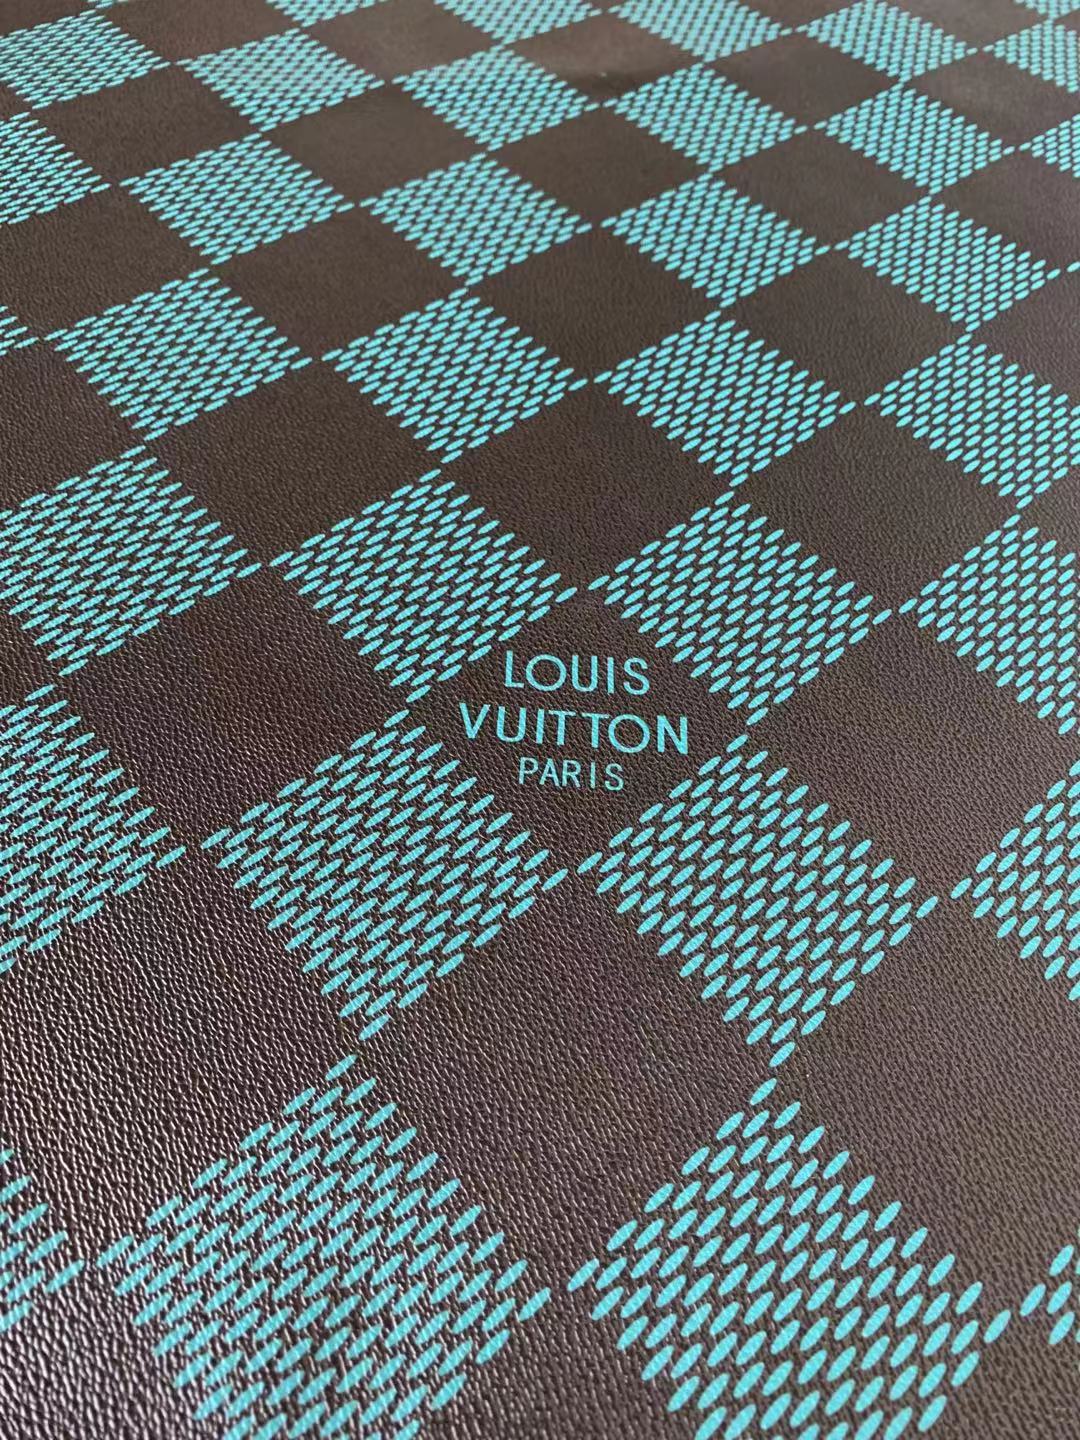 Classic Louis Vuitton Leather Case Fabric, 2.5 inch Big Size Gird Handmade Leather Fabric, Handmade Shoes and Bags Leather By Yard ( Atrovirens )